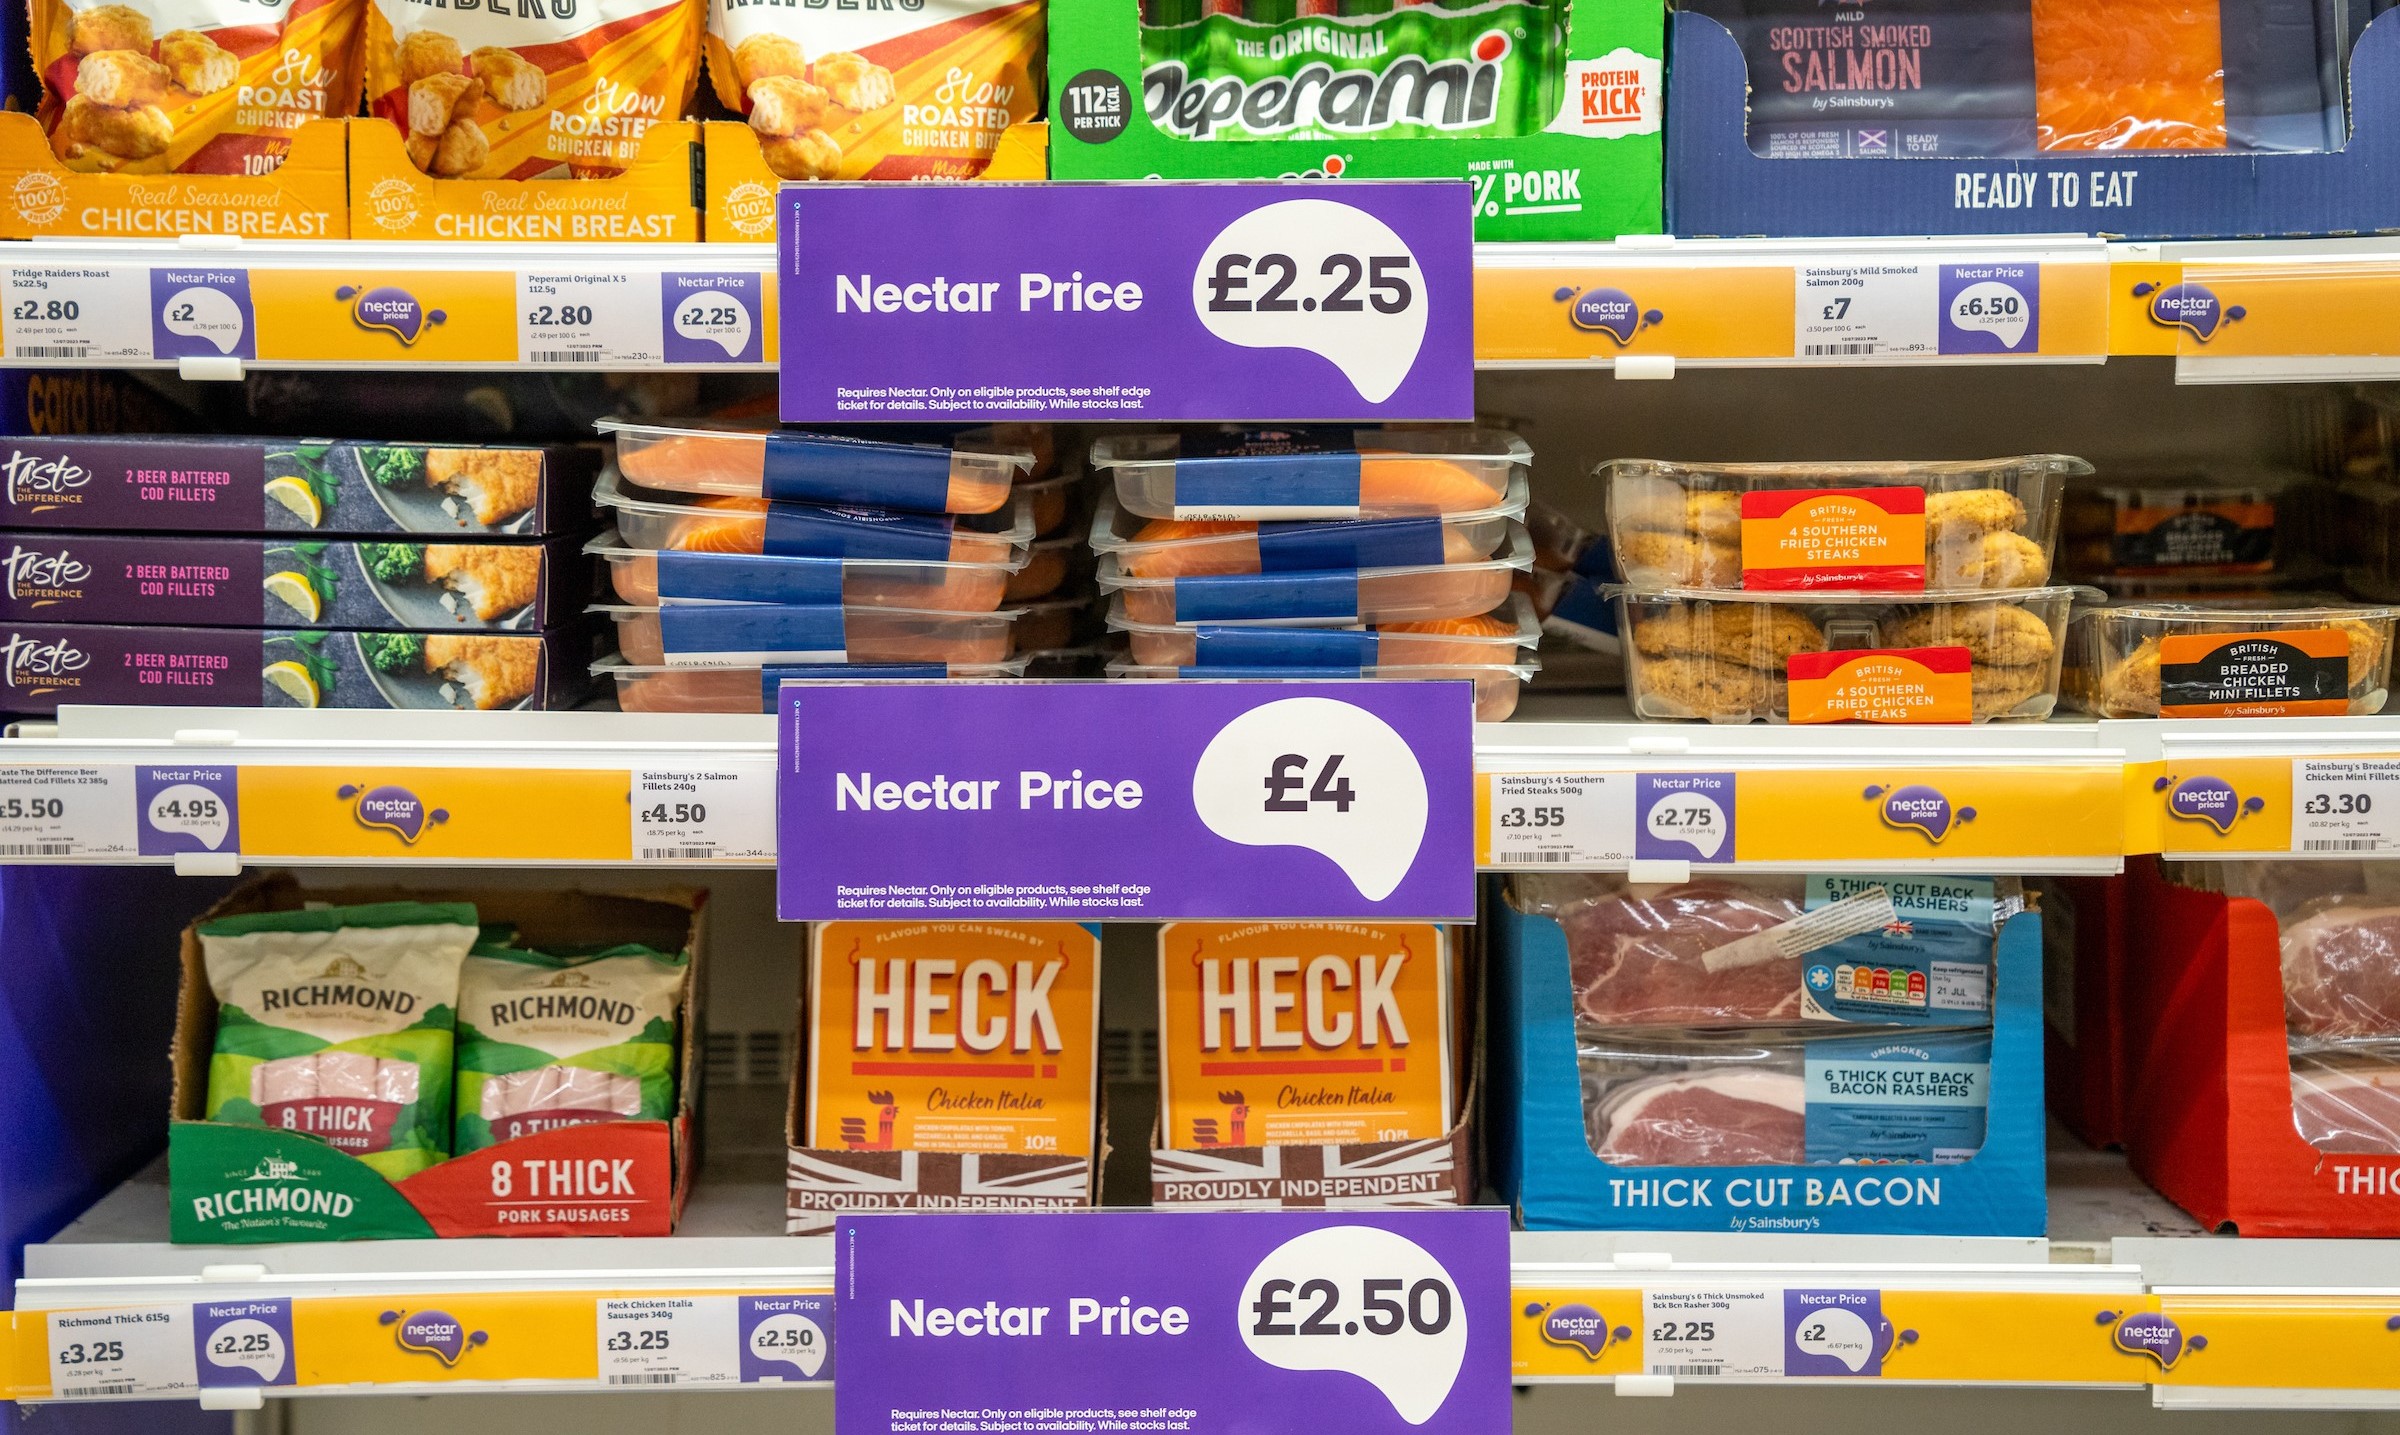 Sainsbury’s reductions meat and poultry merchandise